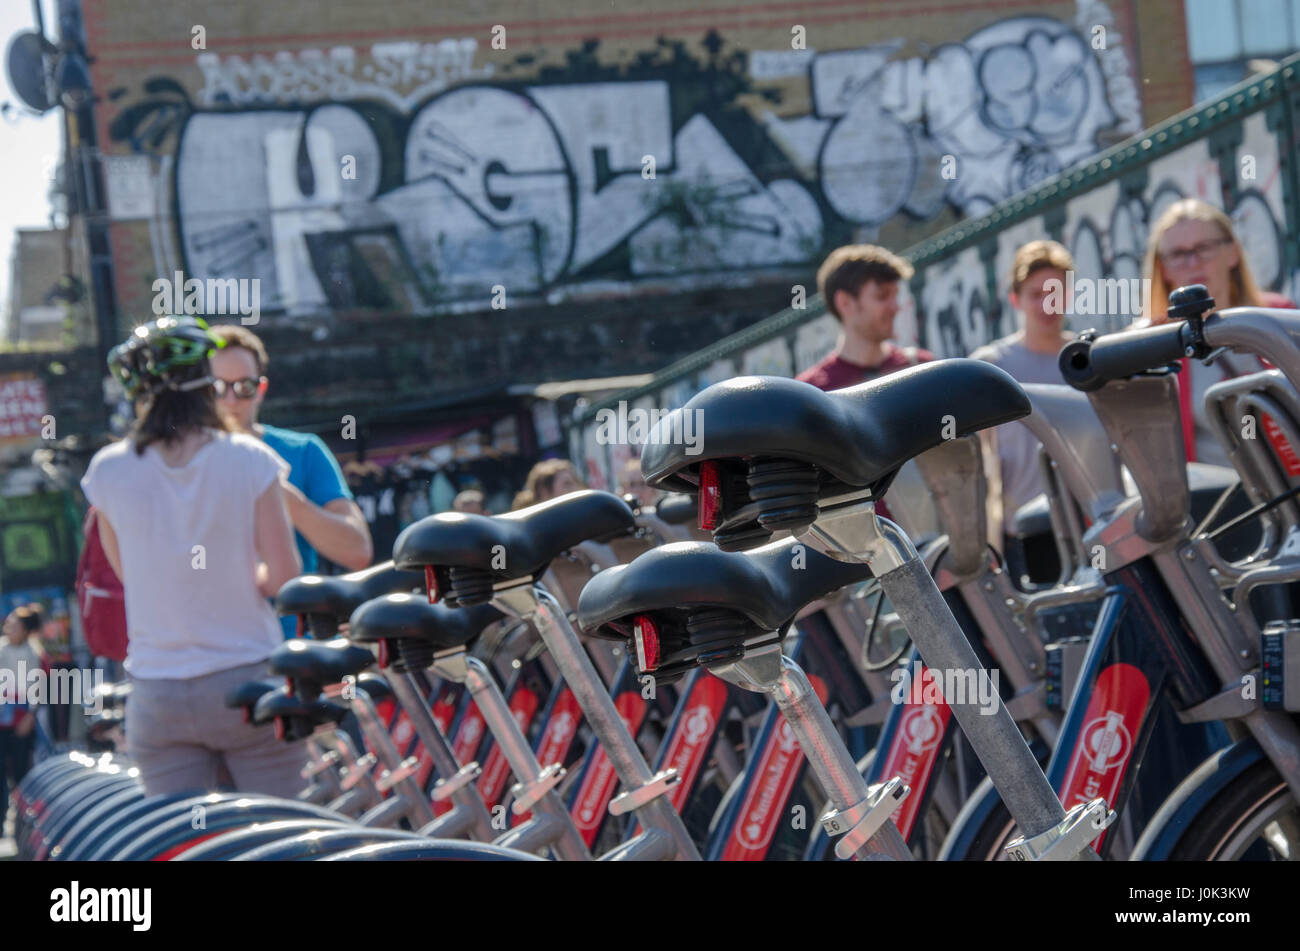 Santander hire bikes at a docking station on Brick Lane in East London. Stock Photo